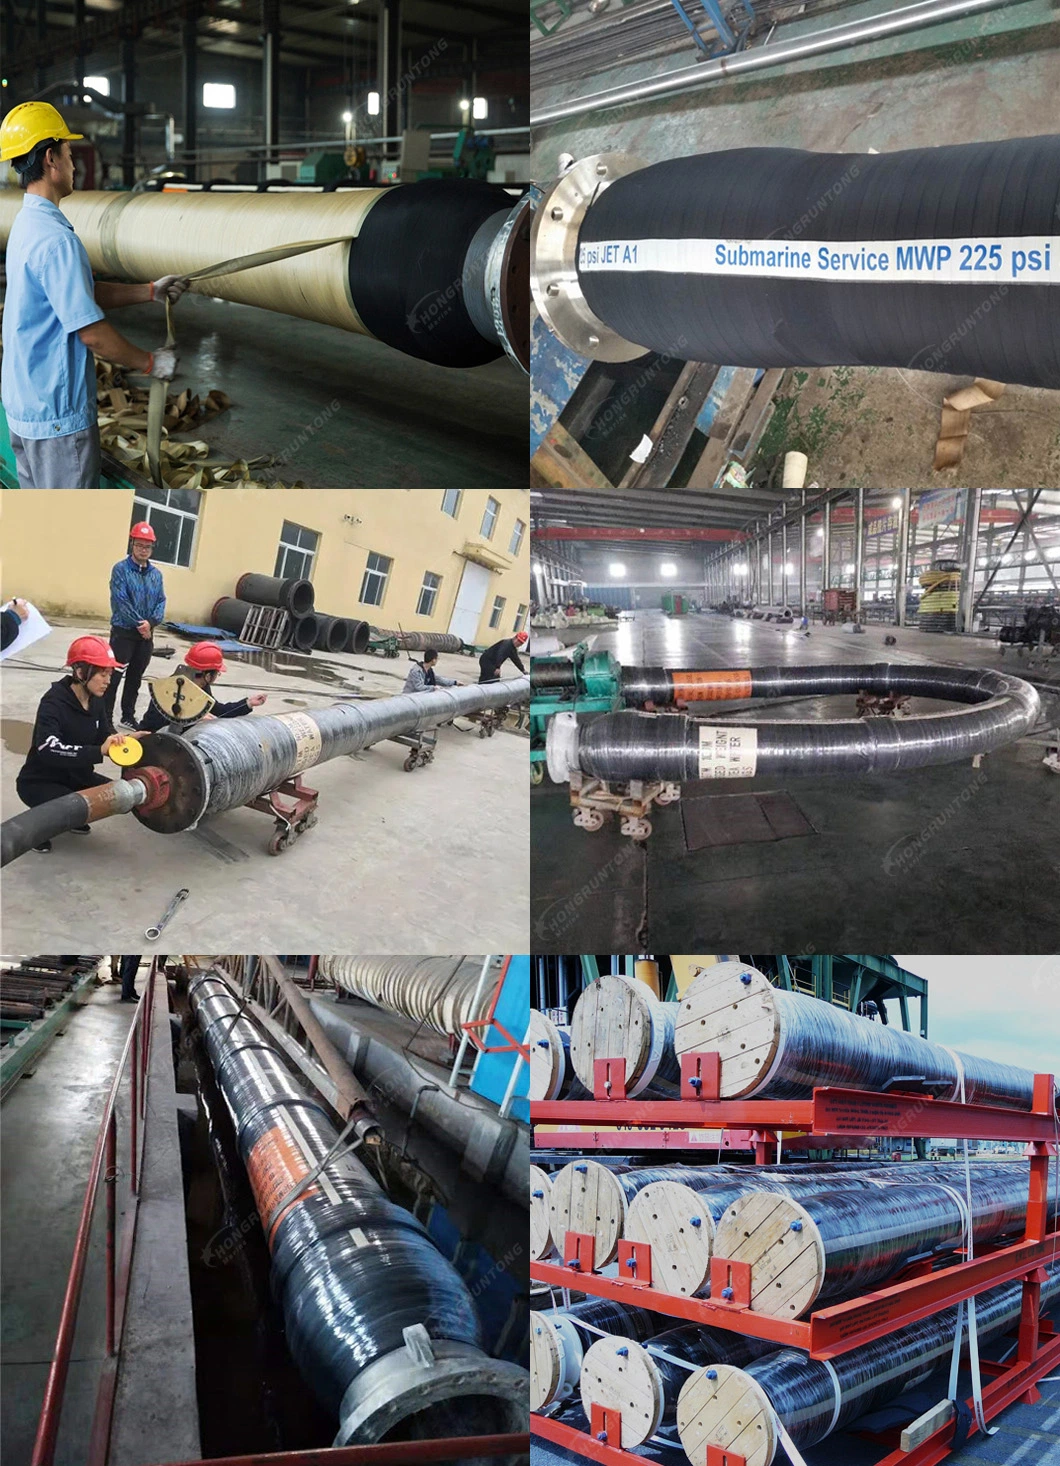 Highly Flexible Single Carcass One End Reinforced Submarine Hose